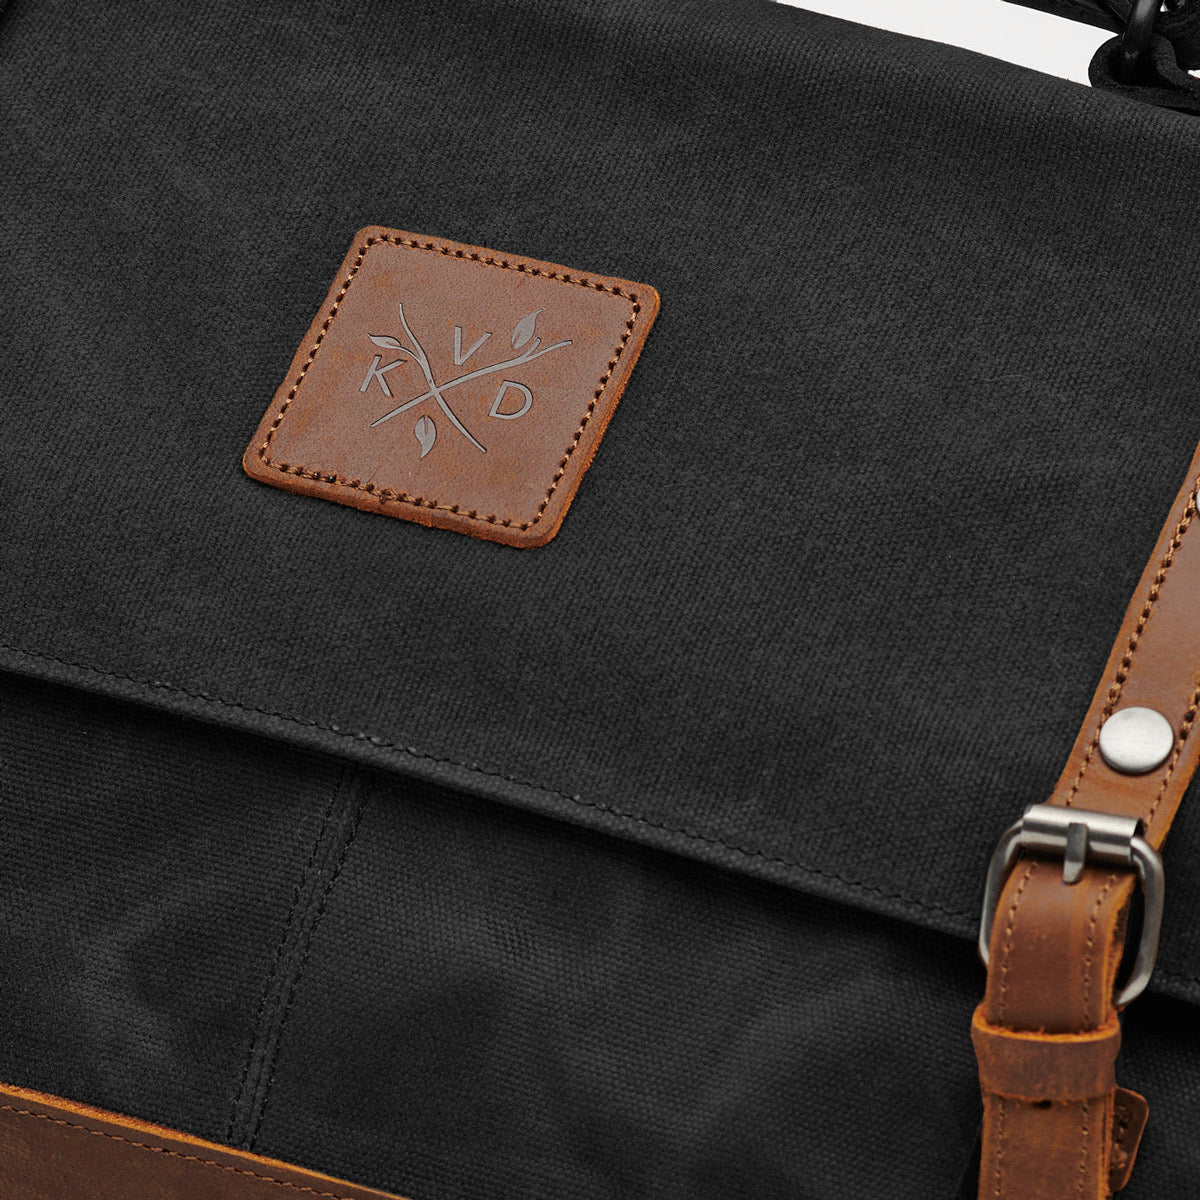 The Black Mersey Messenger Satchel Bag in waxed canvas with reclaimed leather